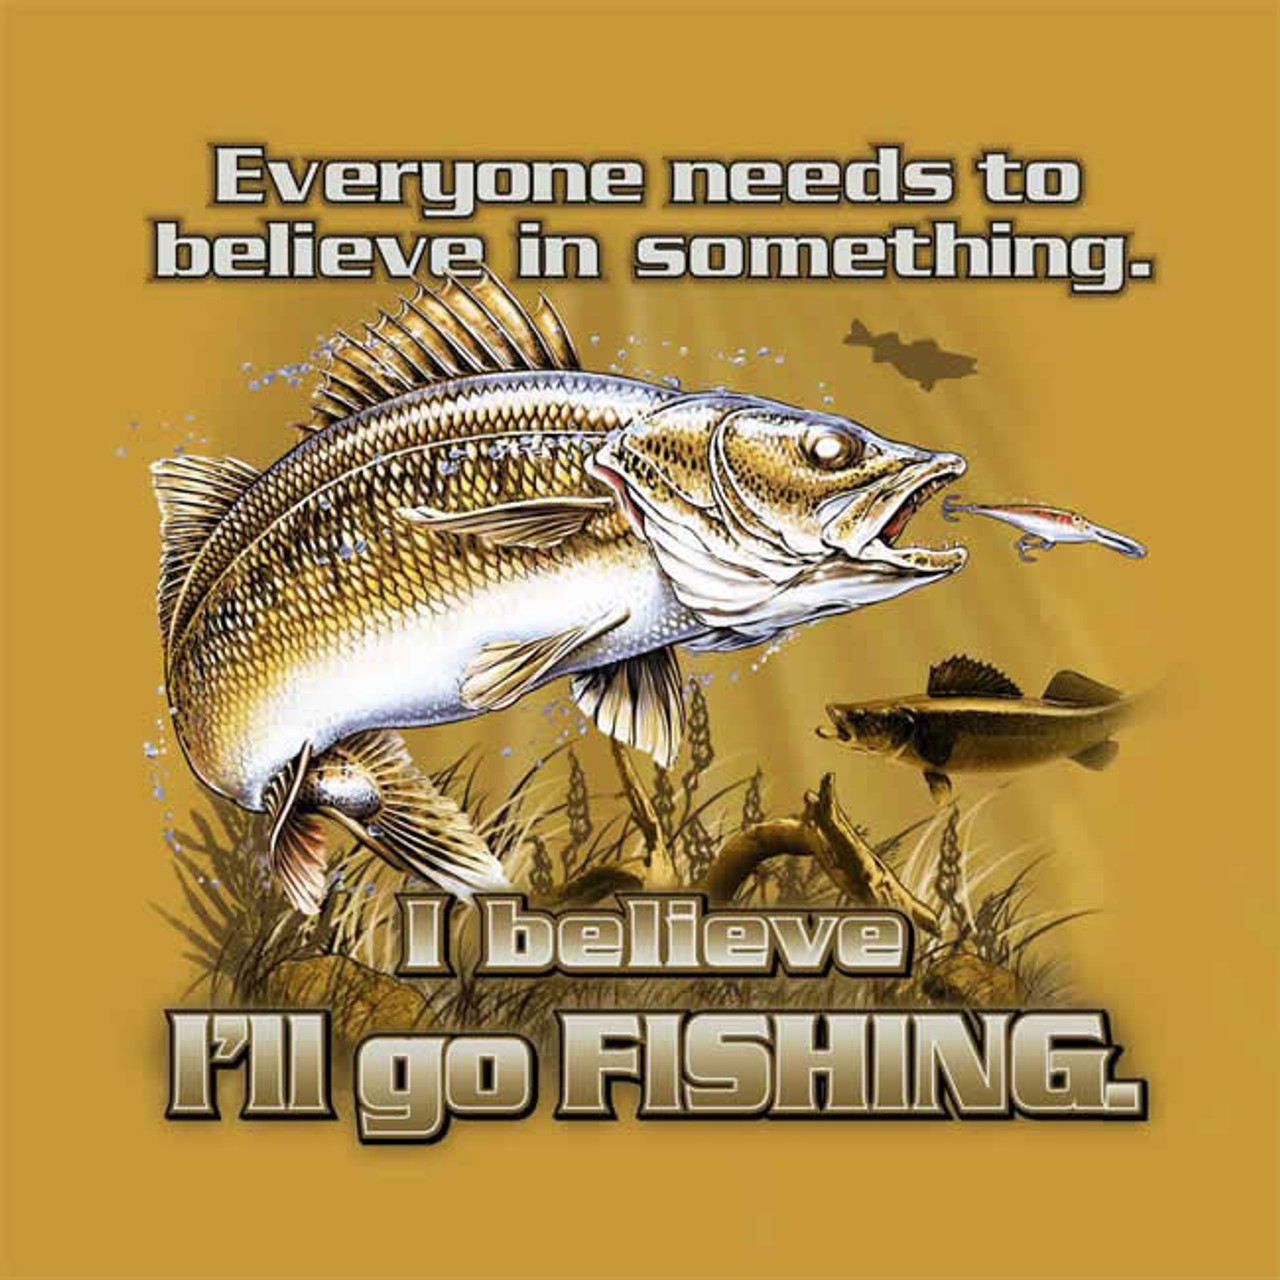 https://cdn11.bigcommerce.com/s-yt6a4/images/stencil/1280x1280/products/884/1758/Fishing-240-95a-5__53103__41771.1468269739.jpg?c=2